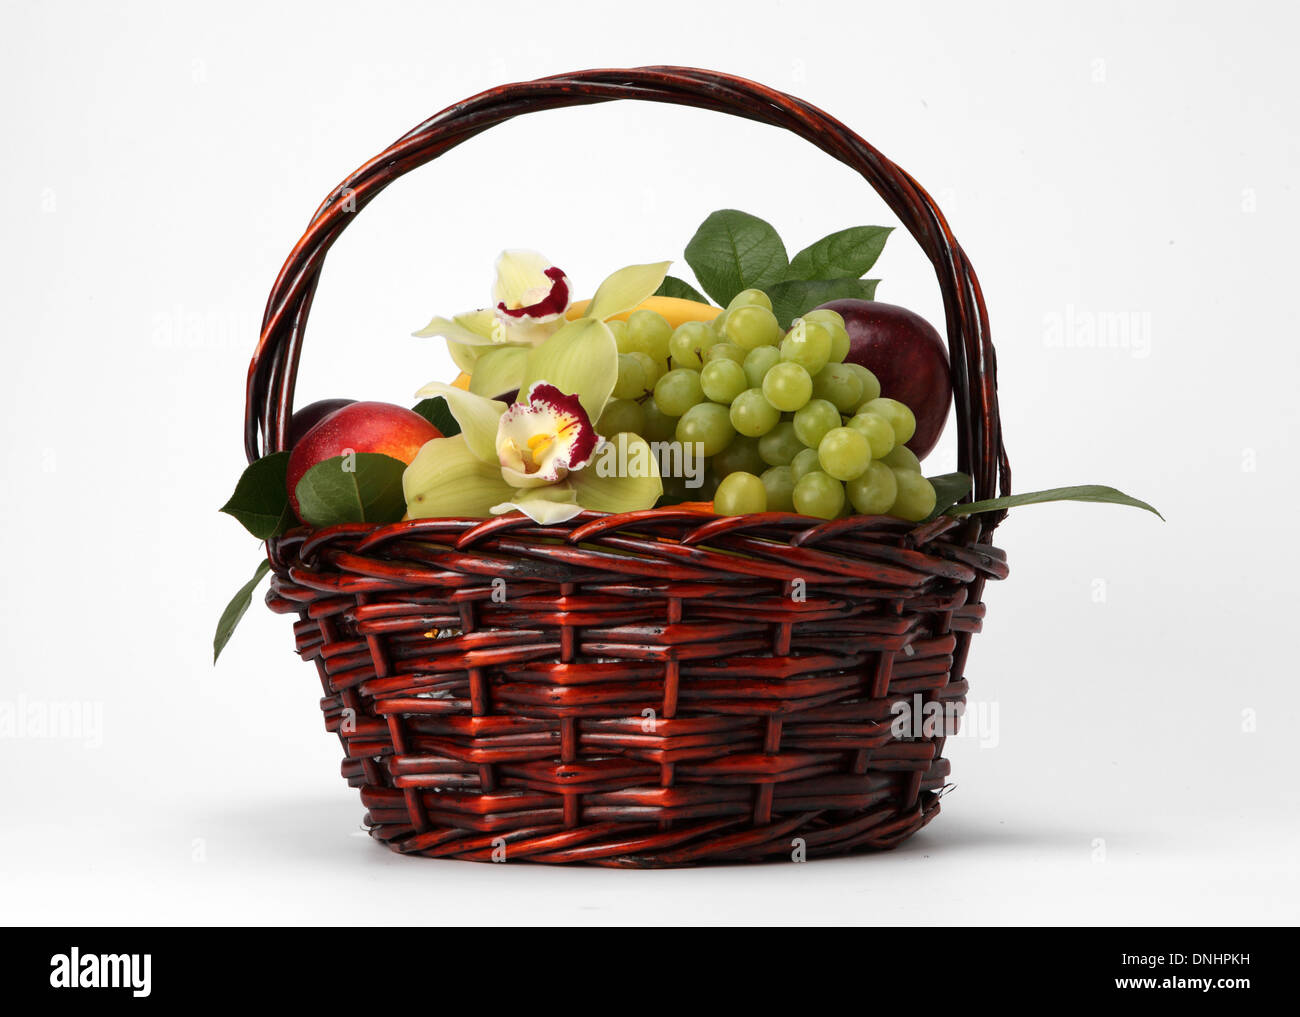 A basket filled with assorted fruit on a white background Stock Photo